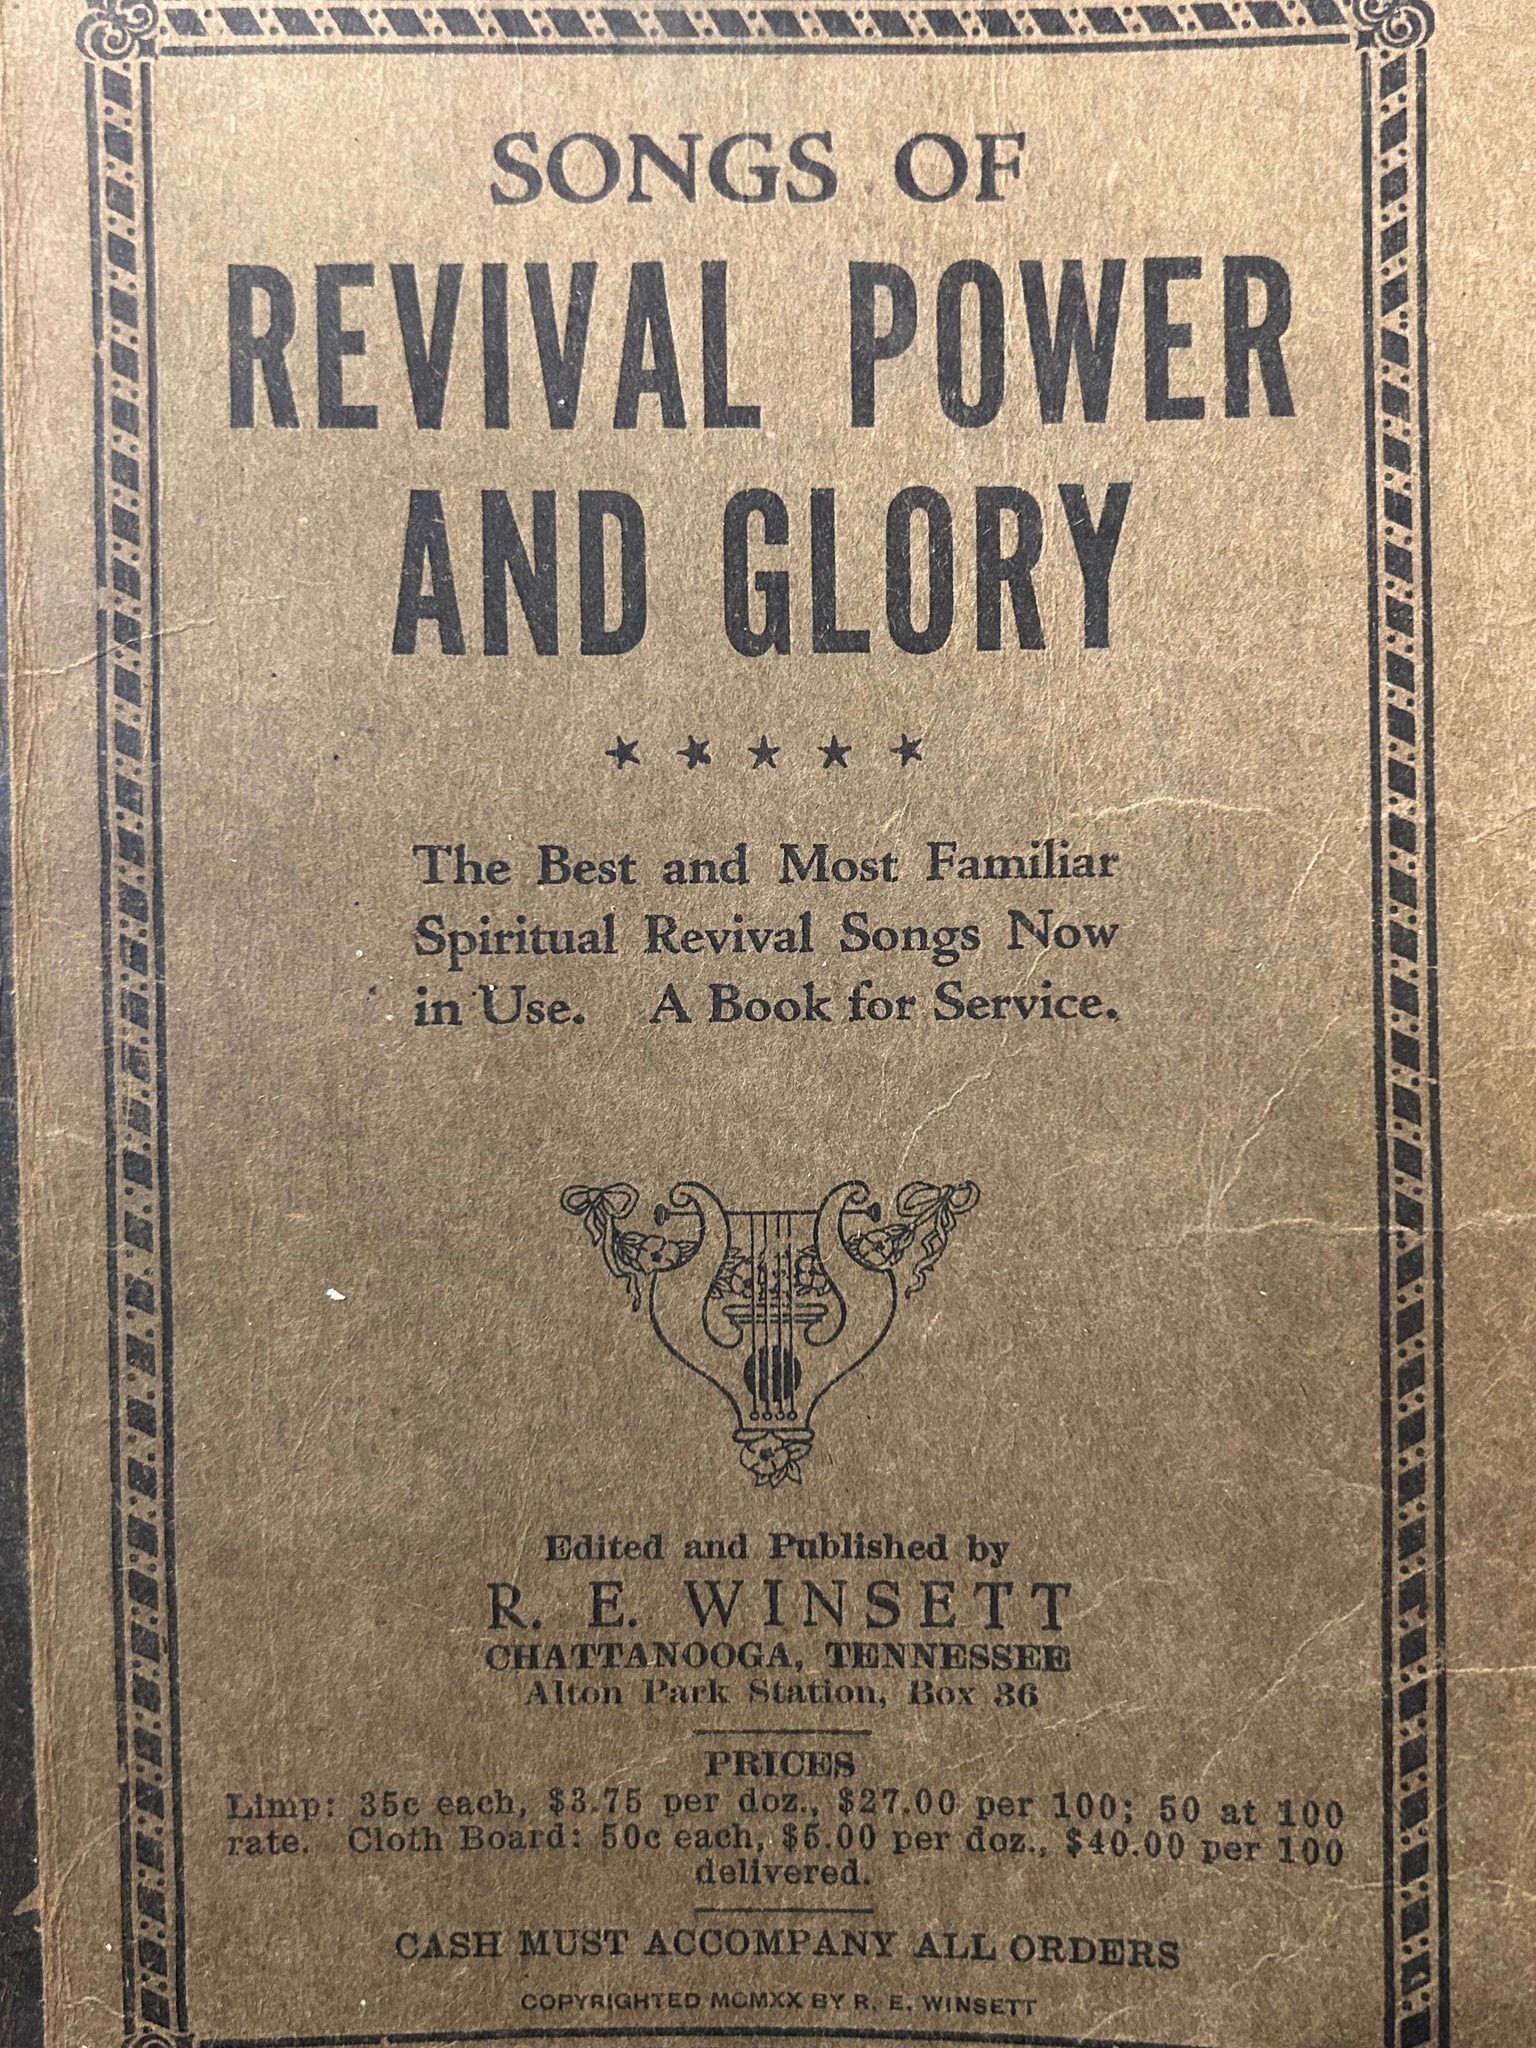 Songs of Revival Power and Glory